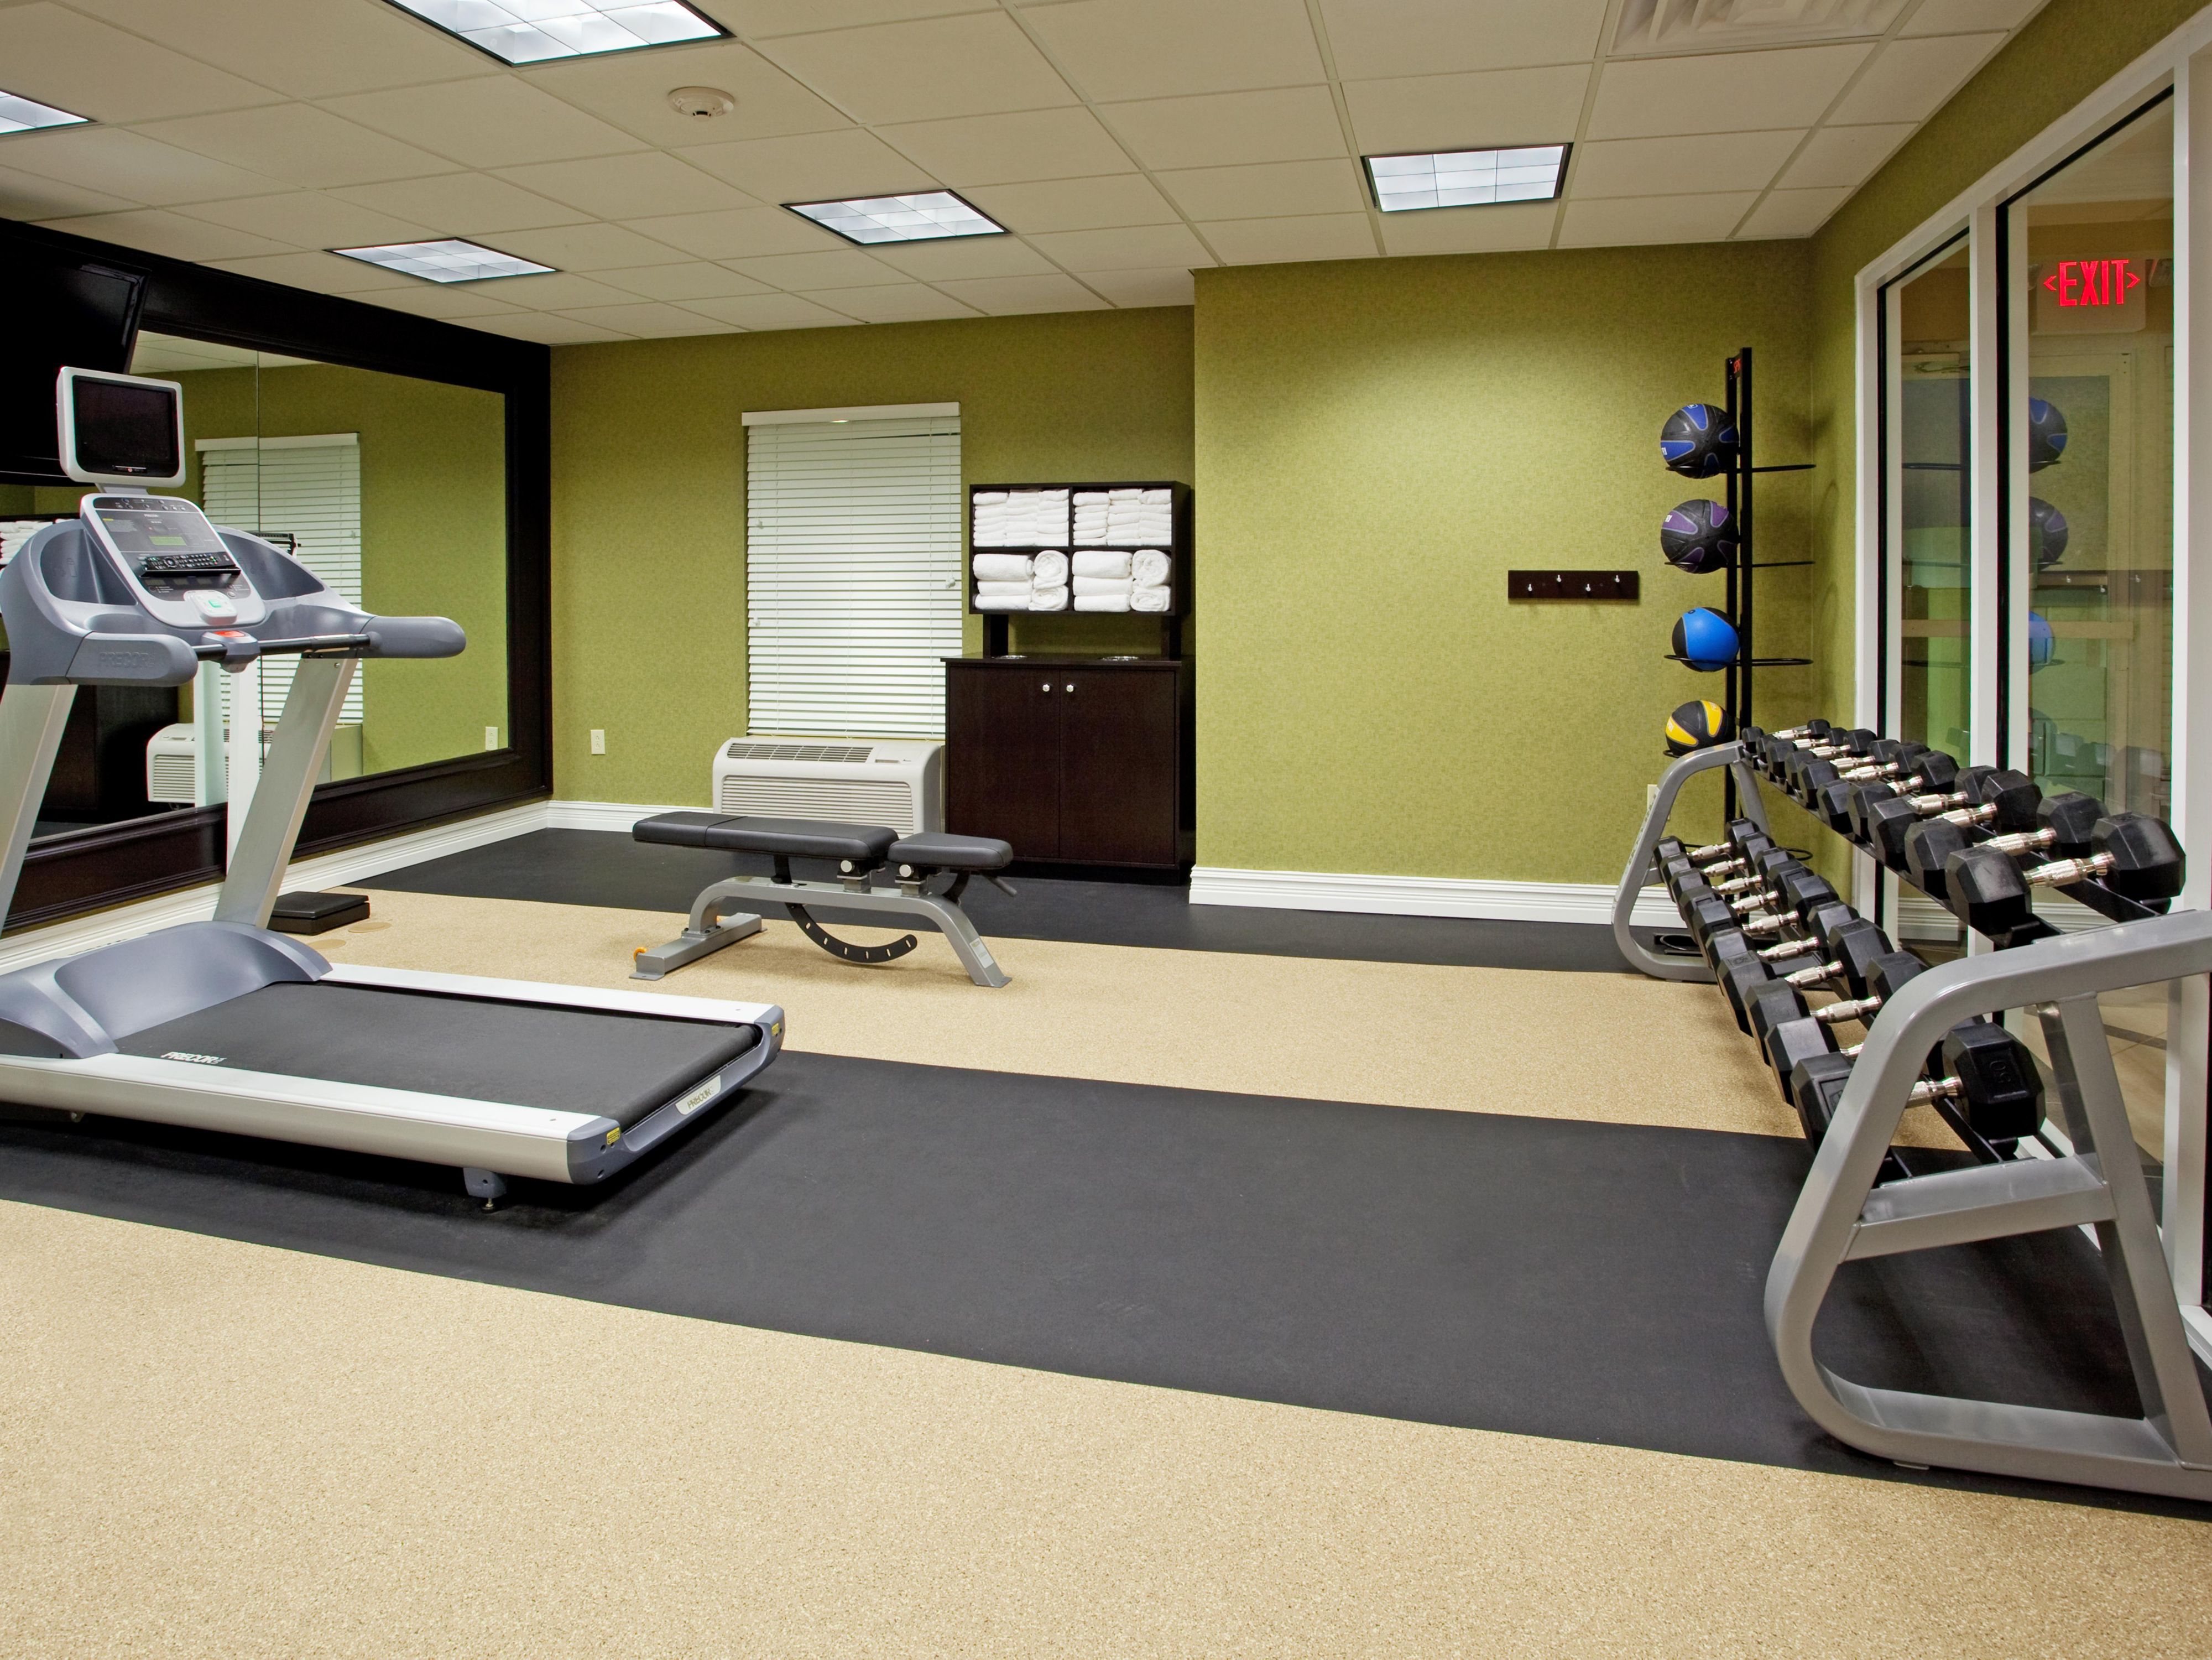 Our state of the art workout facility with elliptical, free weights and treadmill, will keep you energized after a long days work at First Quality or Arthrex.   